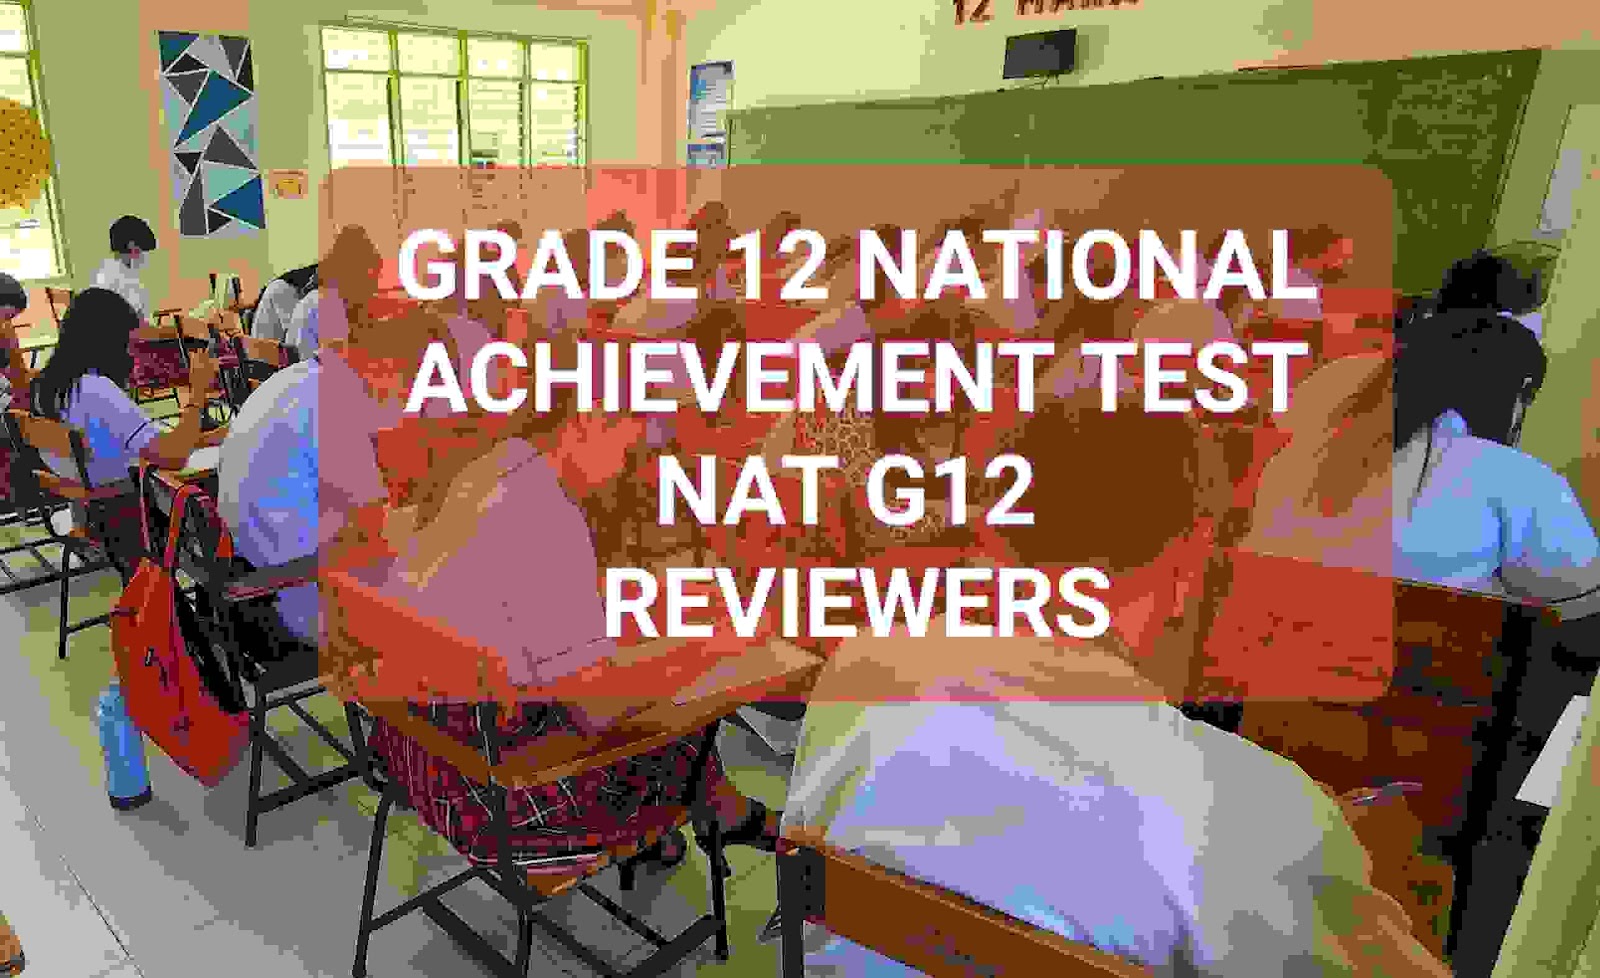 nat reviewer for grade 12 creative writing